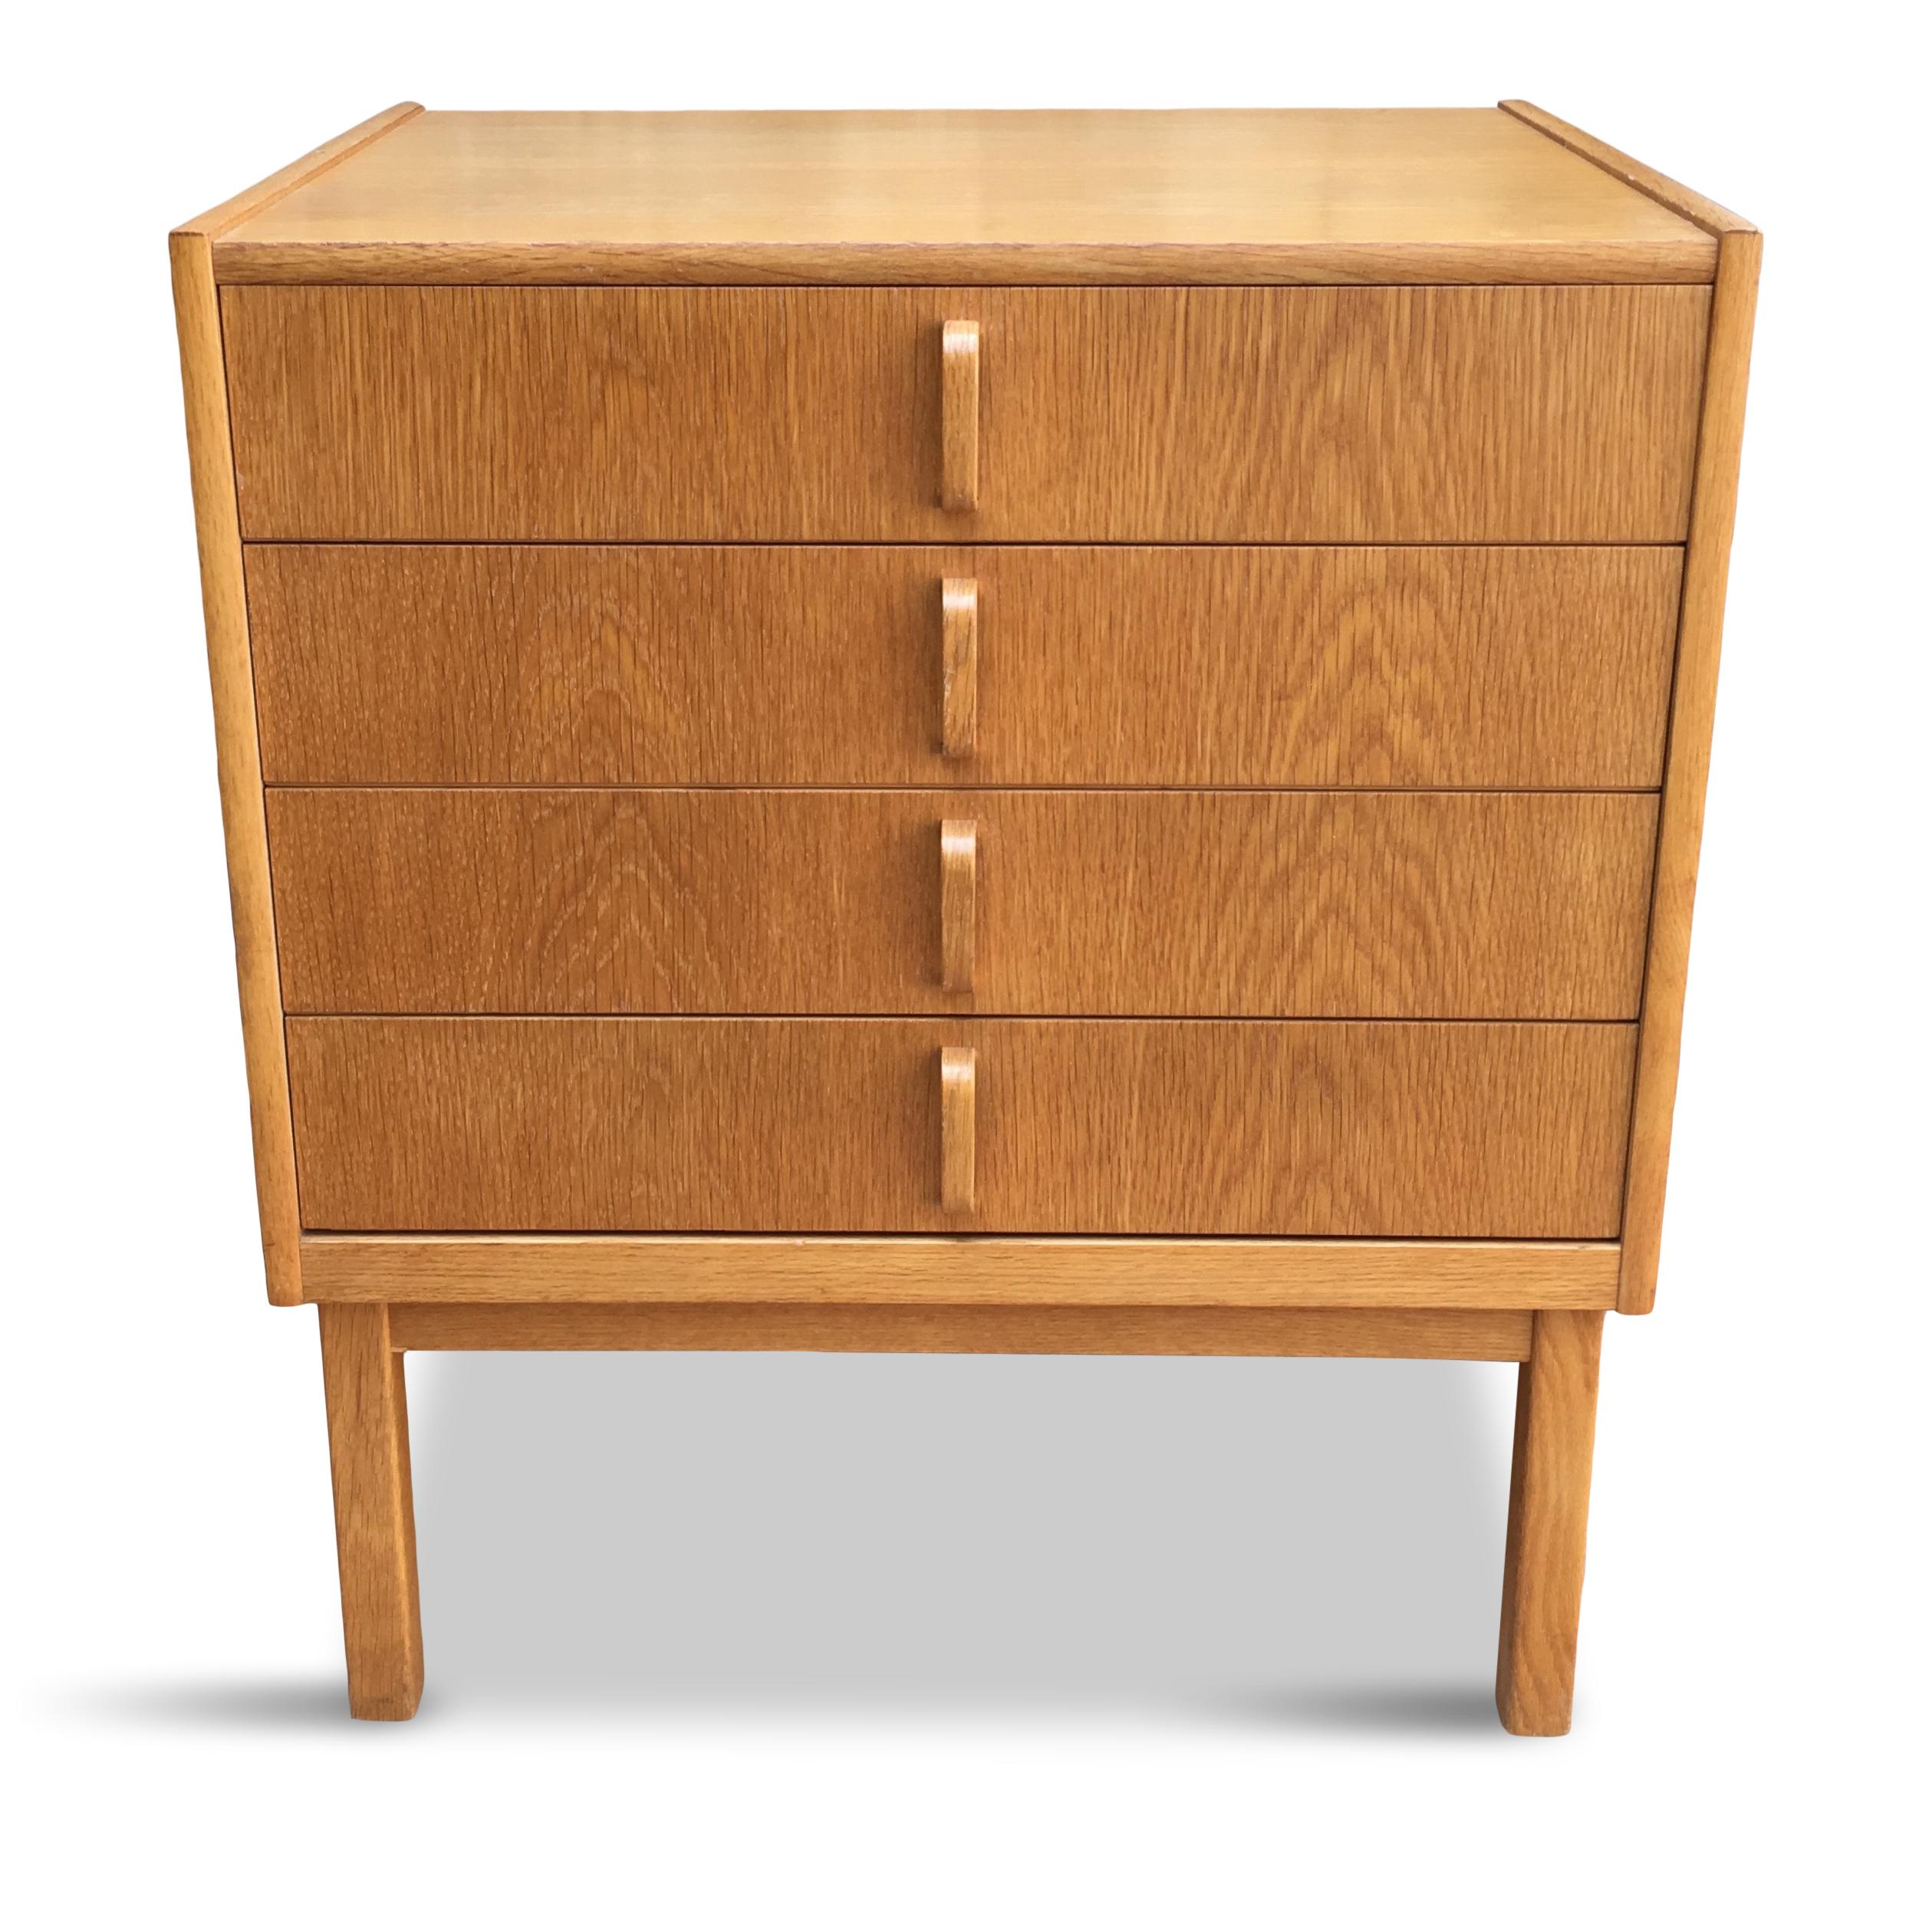 Minimalist form chest of drawers with brass details on the sides. Each drawer features green laminated bottom.